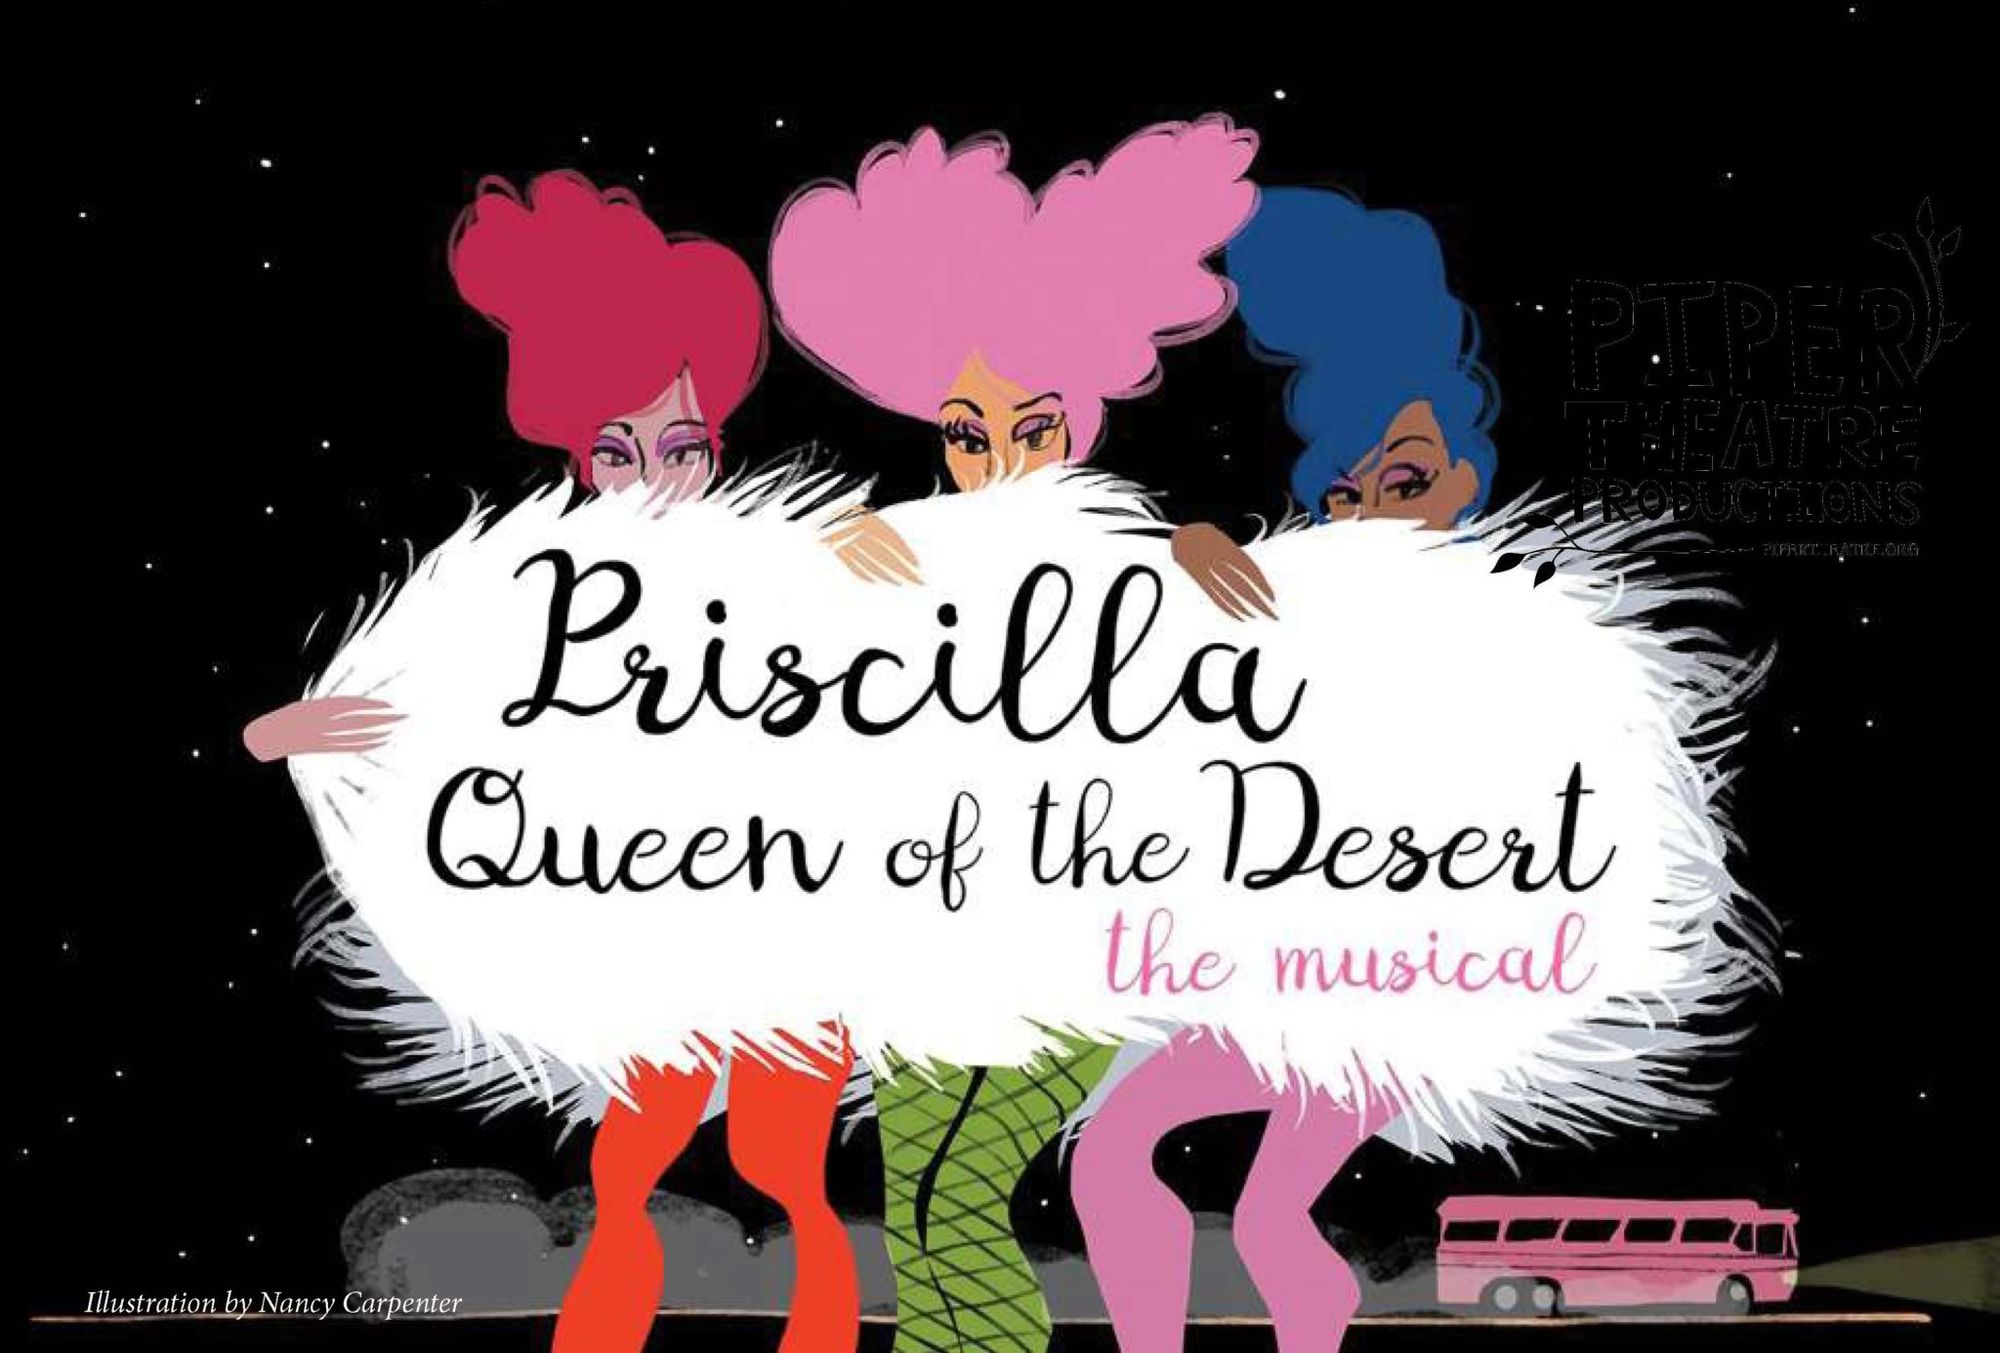 Drag Extravaganza ‘Priscilla Queen Of The Desert’ Brings Fun, Music & Glamour To Park Slope